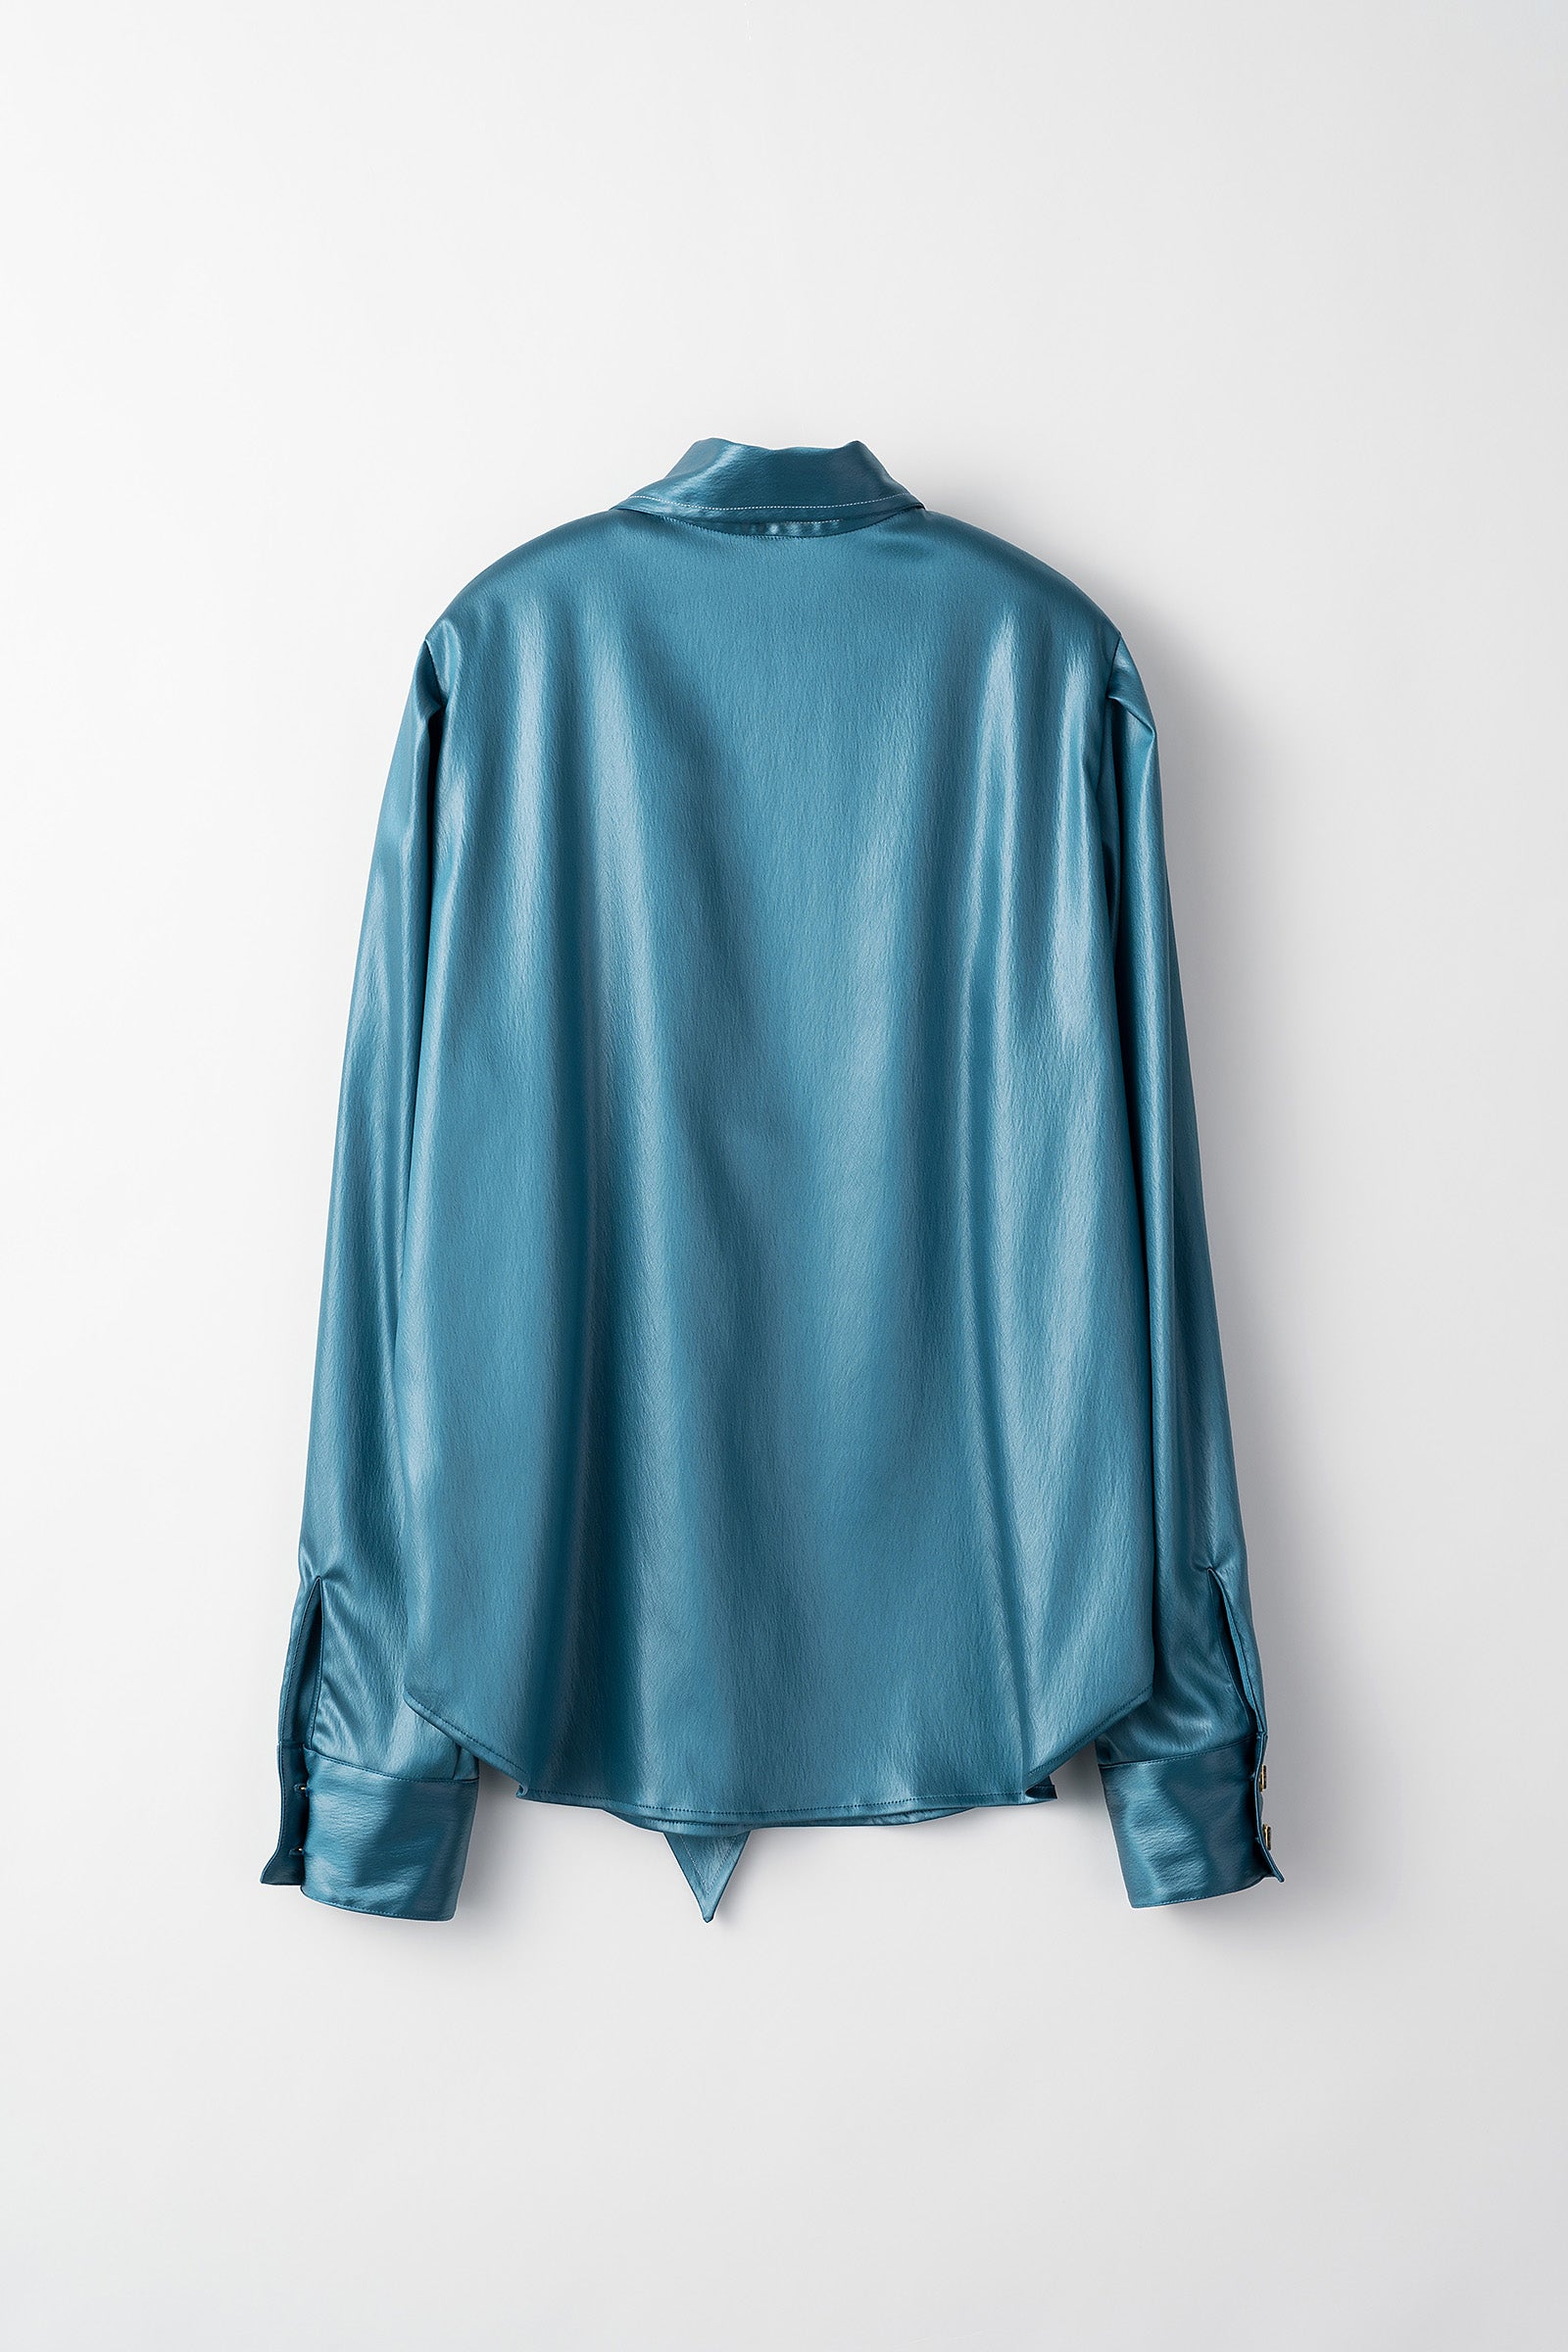 Scarf blouse (Turquoise blue)